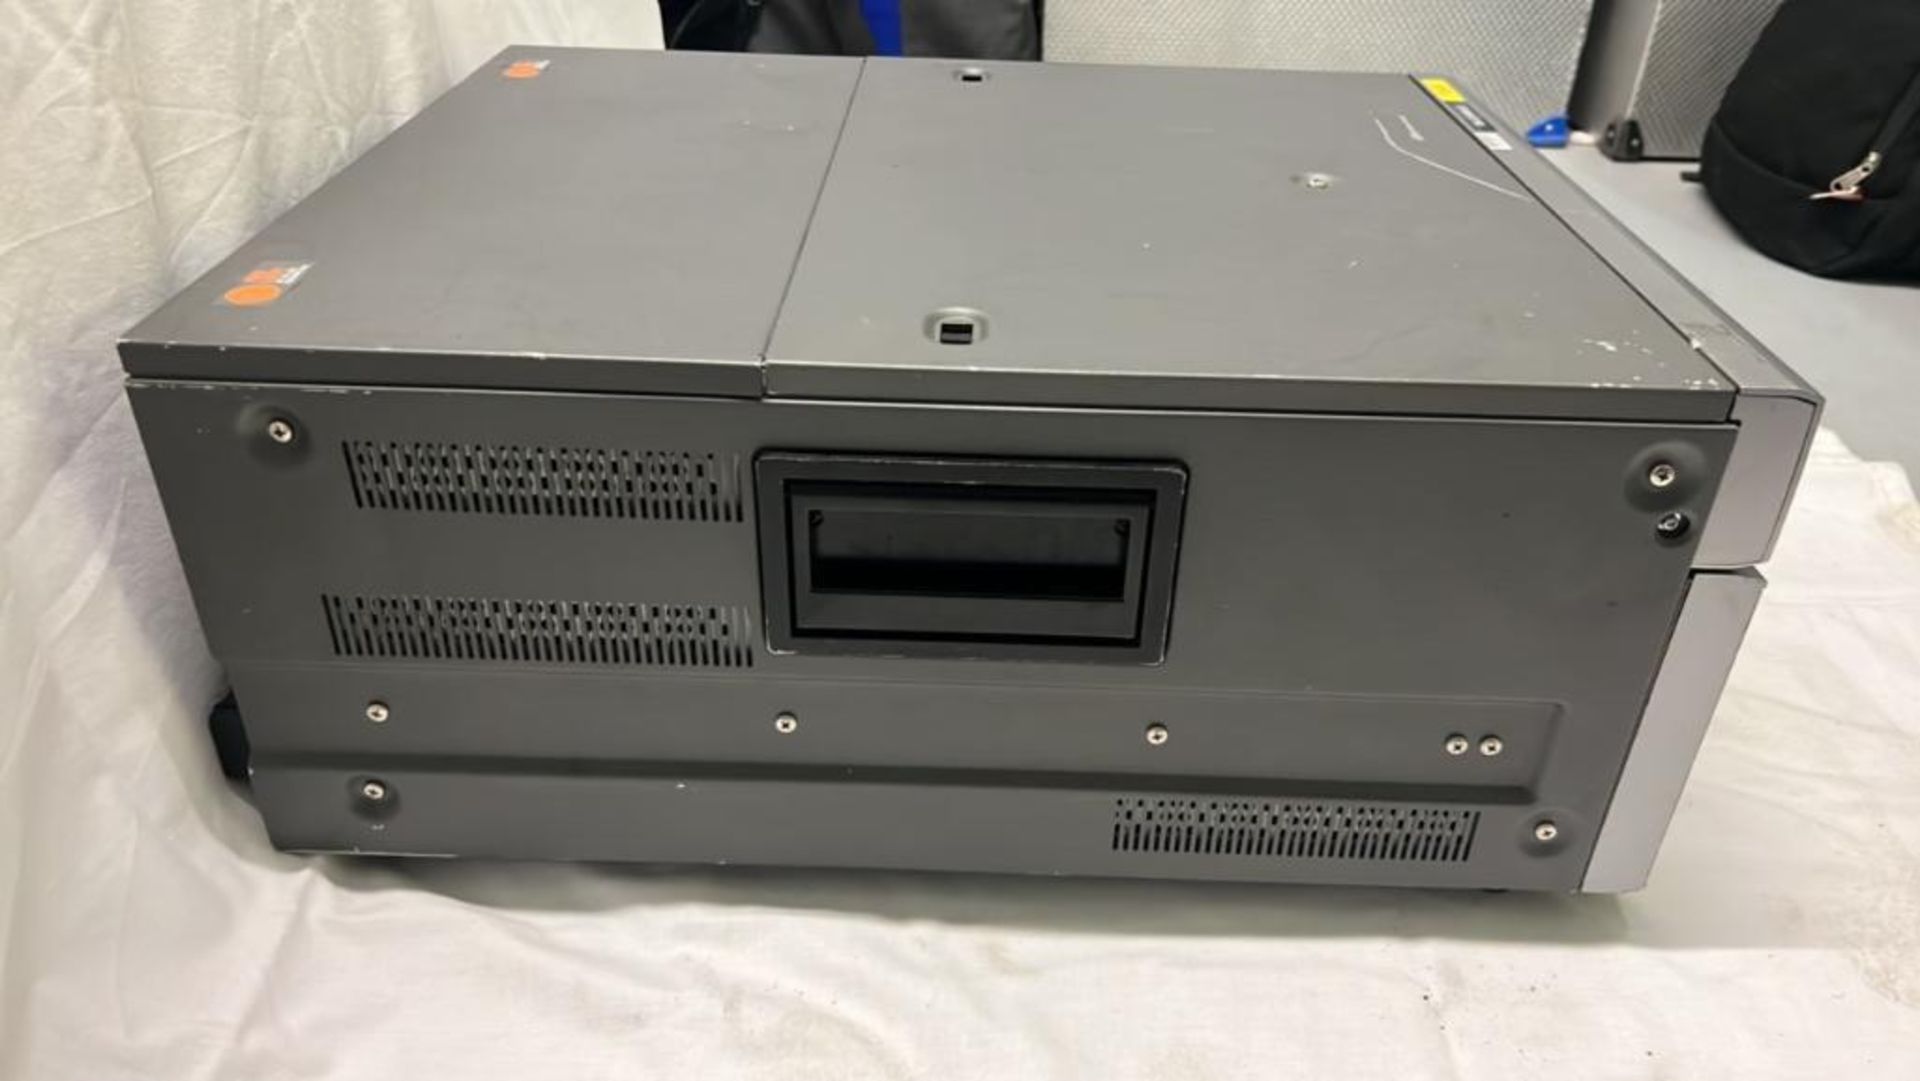 Sony SRW-5500 Digital Videocassette recorder with flight case SN :13930 - Image 2 of 6